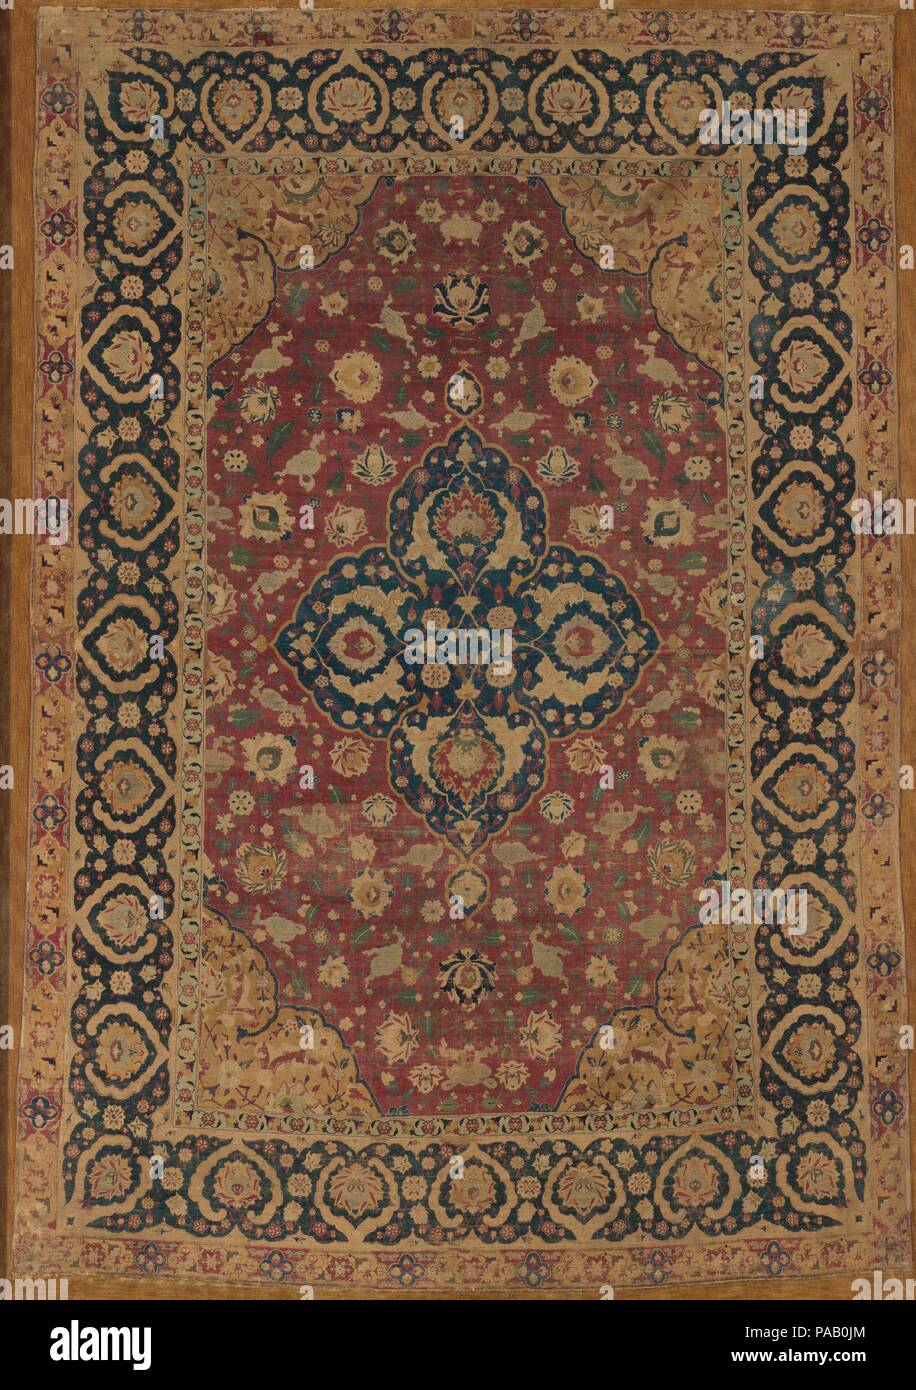 https://c8.alamy.com/comp/PAB0JM/silk-kashan-carpet-dimensions-mount-dimensions-l-105-12-in-268-cm-w-76-12-in-1943-cm-weight-in-mount-555-lbs-2517-kg-date-second-half-16th-century-this-carpet-possibly-woven-in-the-silk-trade-and-carpet-manufacturing-center-of-kashan-has-a-dark-blue-quatrefoil-medallion-at-its-center-decorative-elements-on-this-and-other-related-carpets-from-kashan-and-tabriz-indicate-that-weavers-may-have-used-pattern-books-containing-popular-motifs-to-guide-them-in-production-these-designs-are-also-present-in-other-media-particularly-in-the-arts-of-the-book-the-use-of-metal-wrap-PAB0JM.jpg